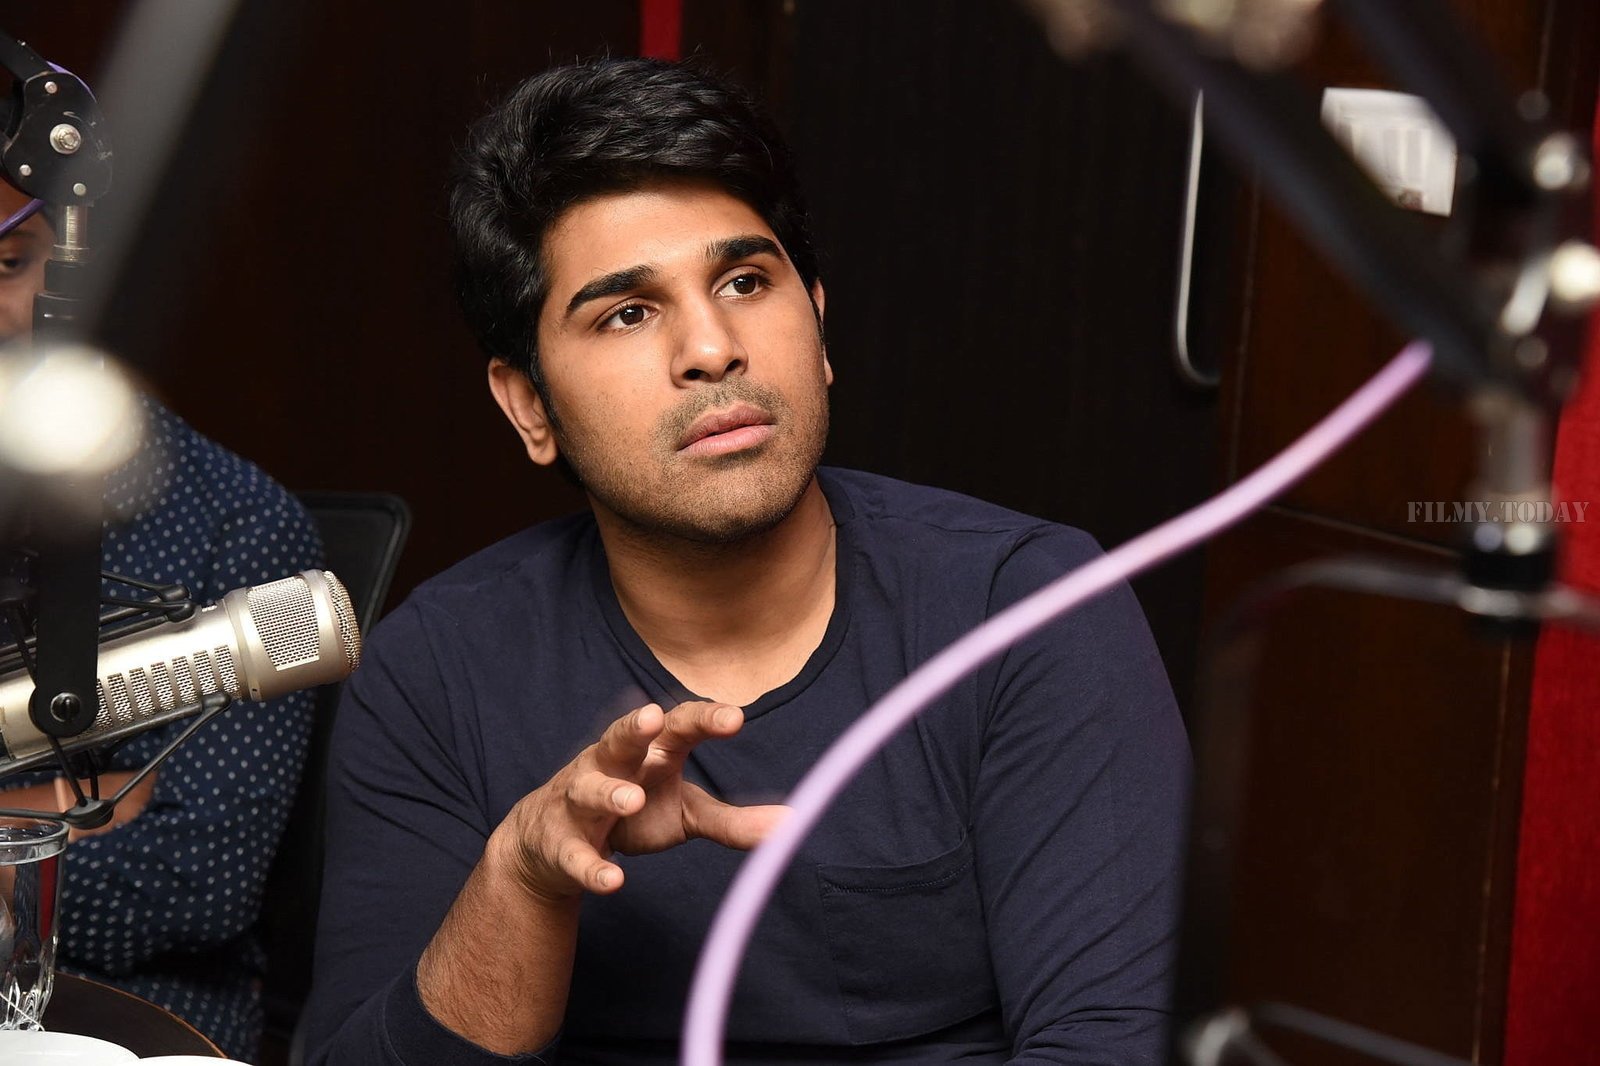 Allu Sirish - ABCD Movie Song Launch At RED FM 93.5 FM Photos | Picture 1633270